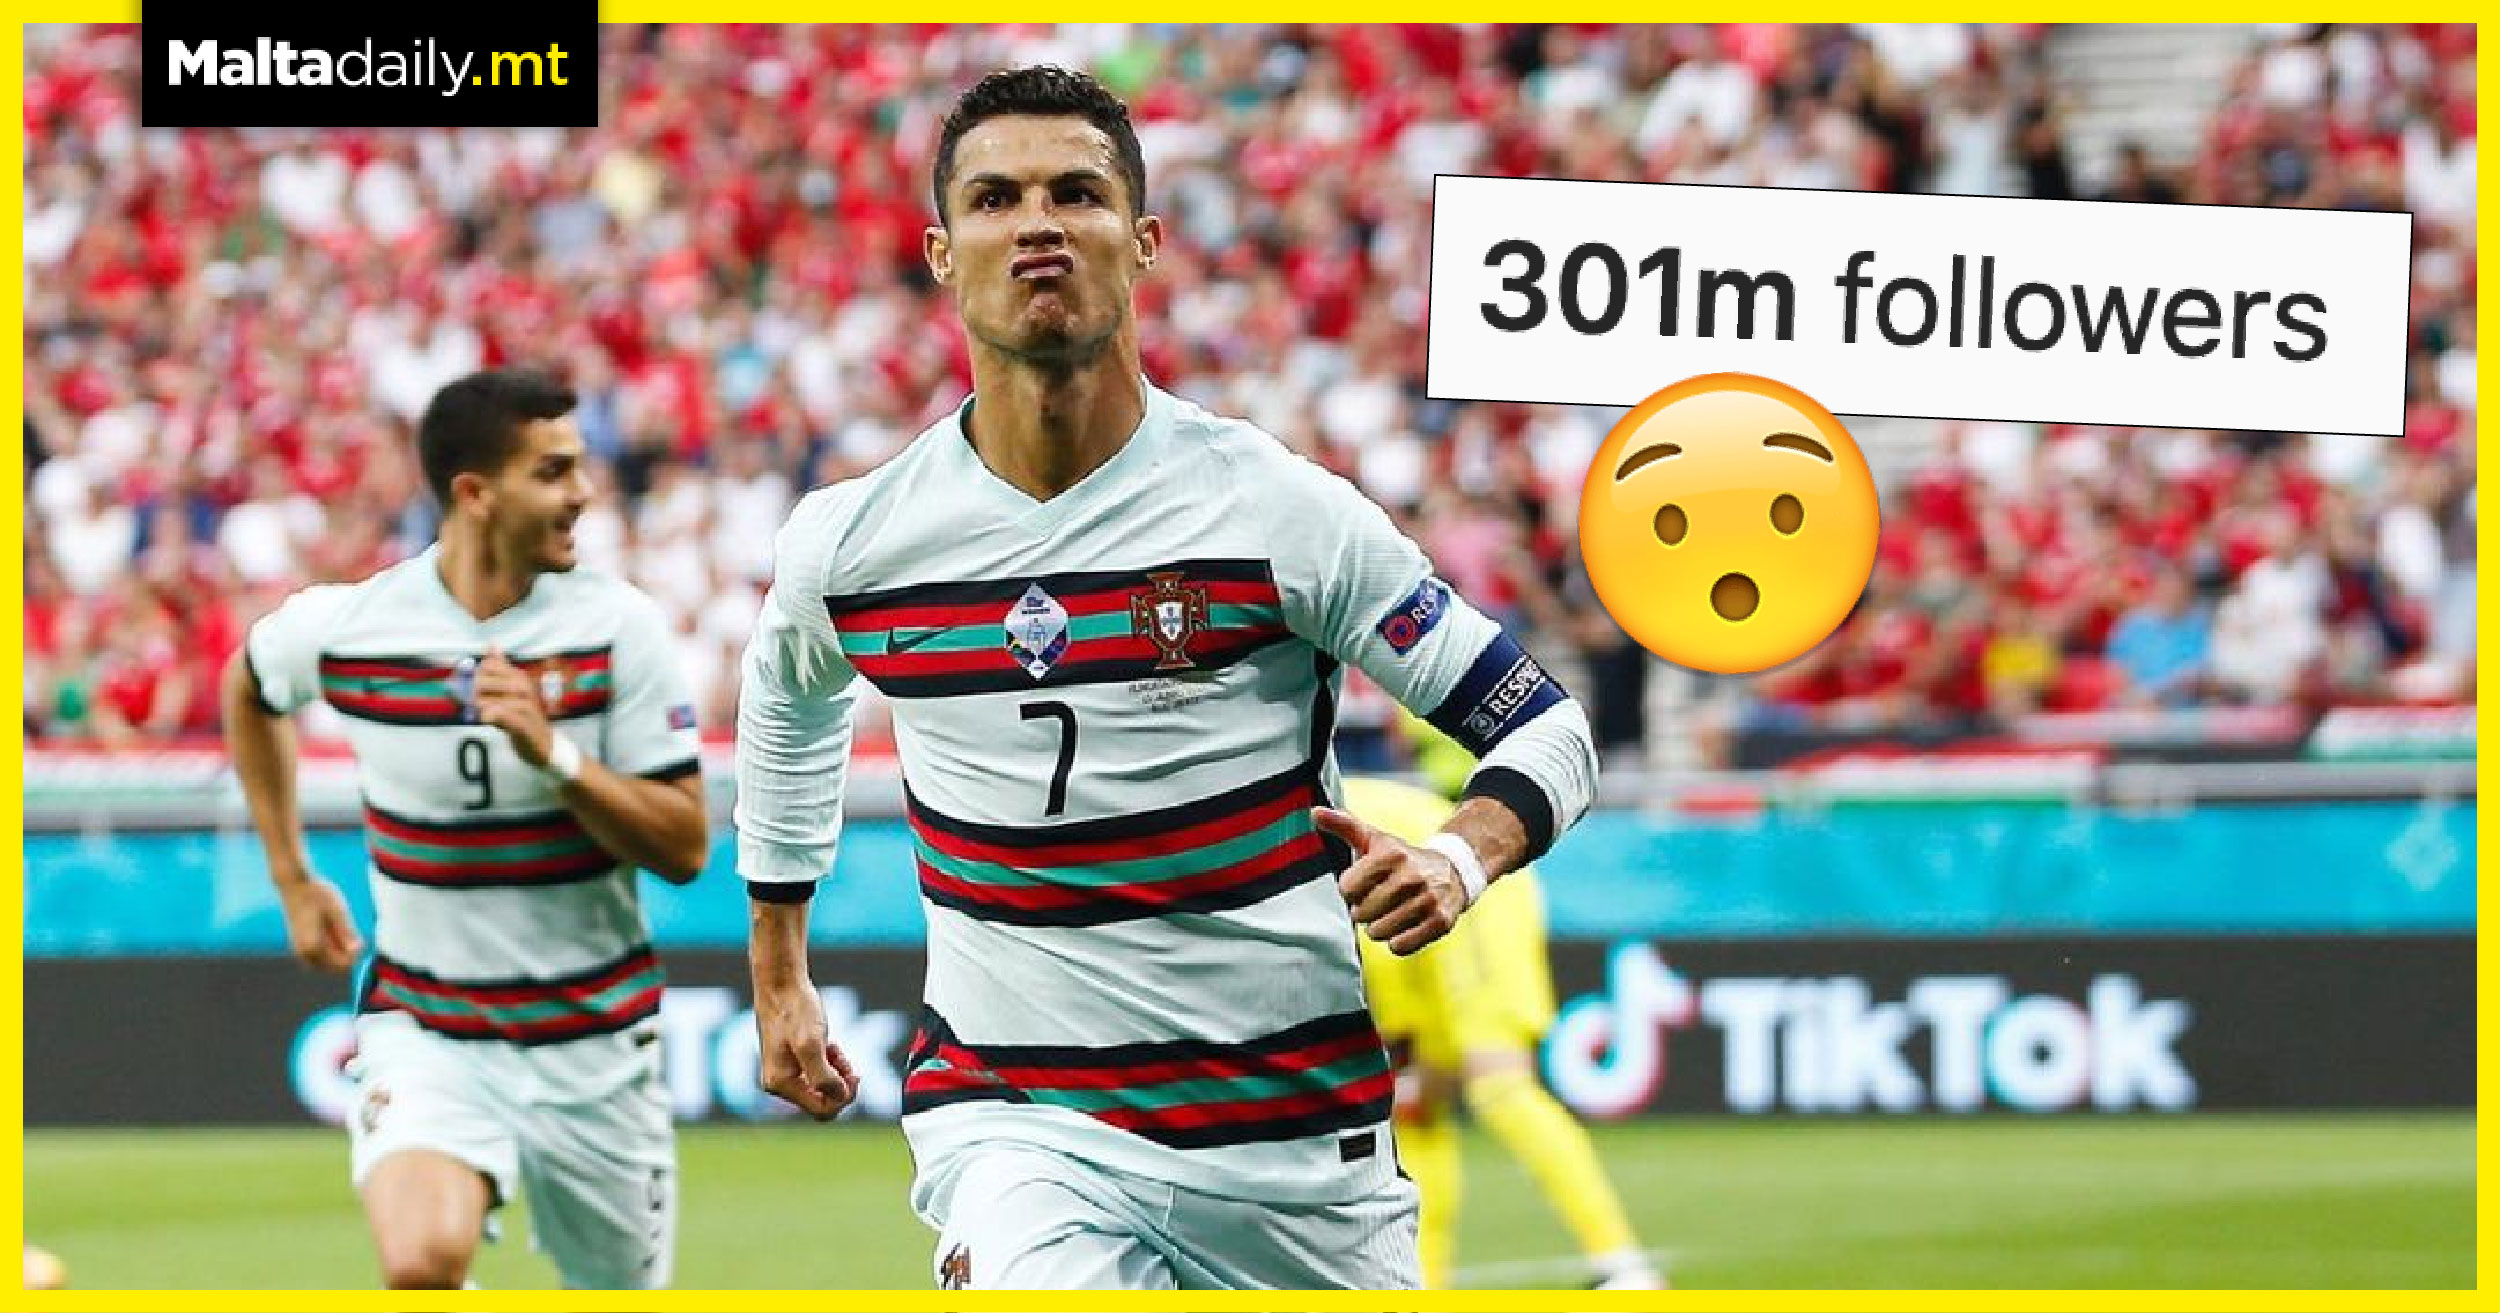 Cristiano Ronaldo becomes first person to reach 300 million followers on Instagram